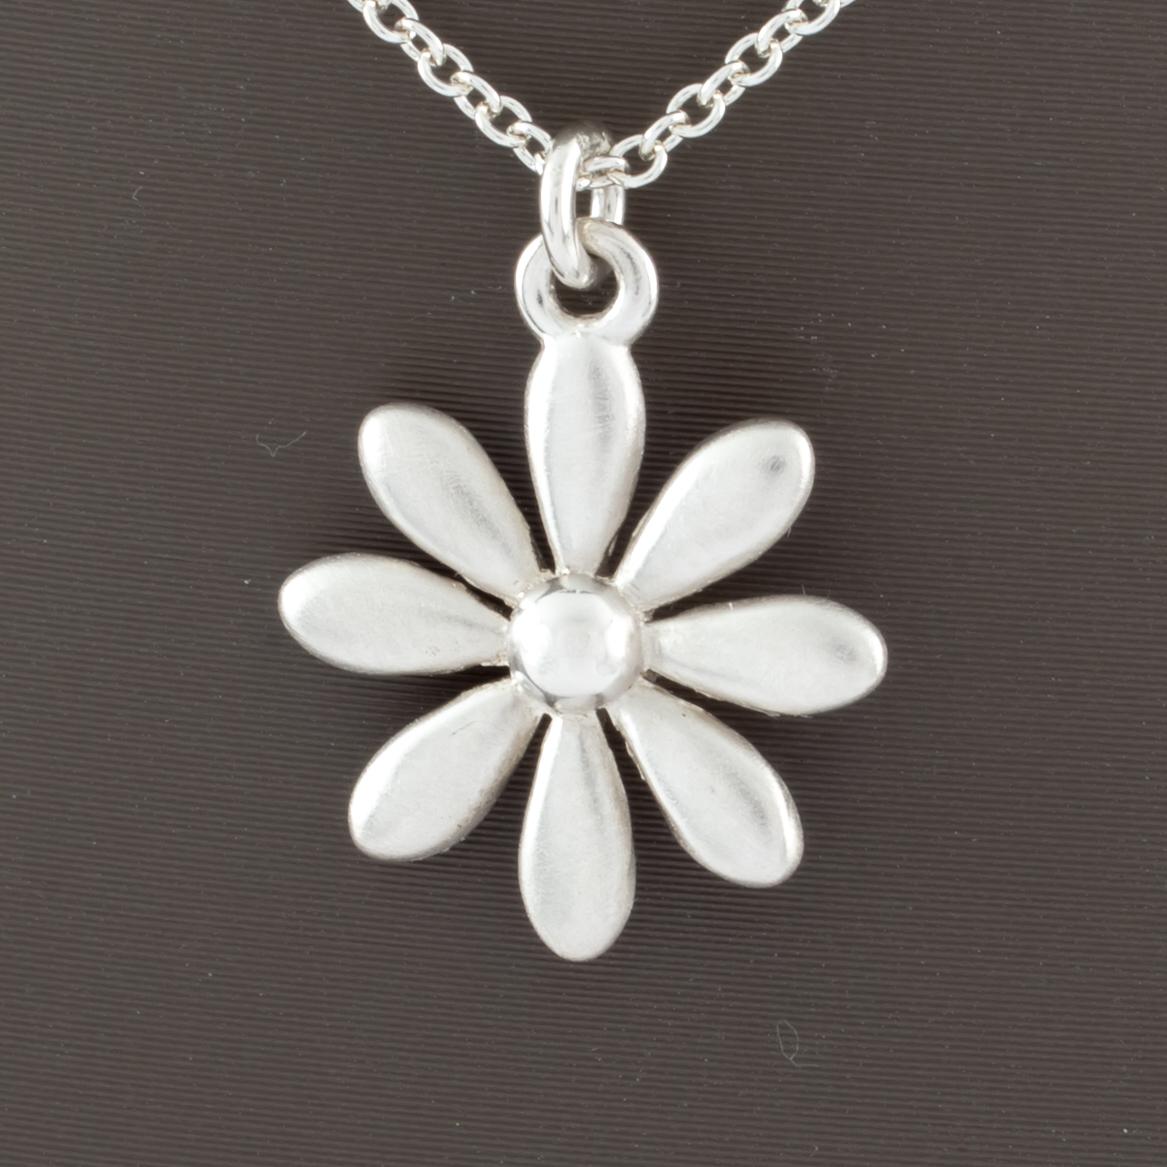 Gorgeous Sterling Silver Daisy Pendant
14 mm in Diameter
Includes 16